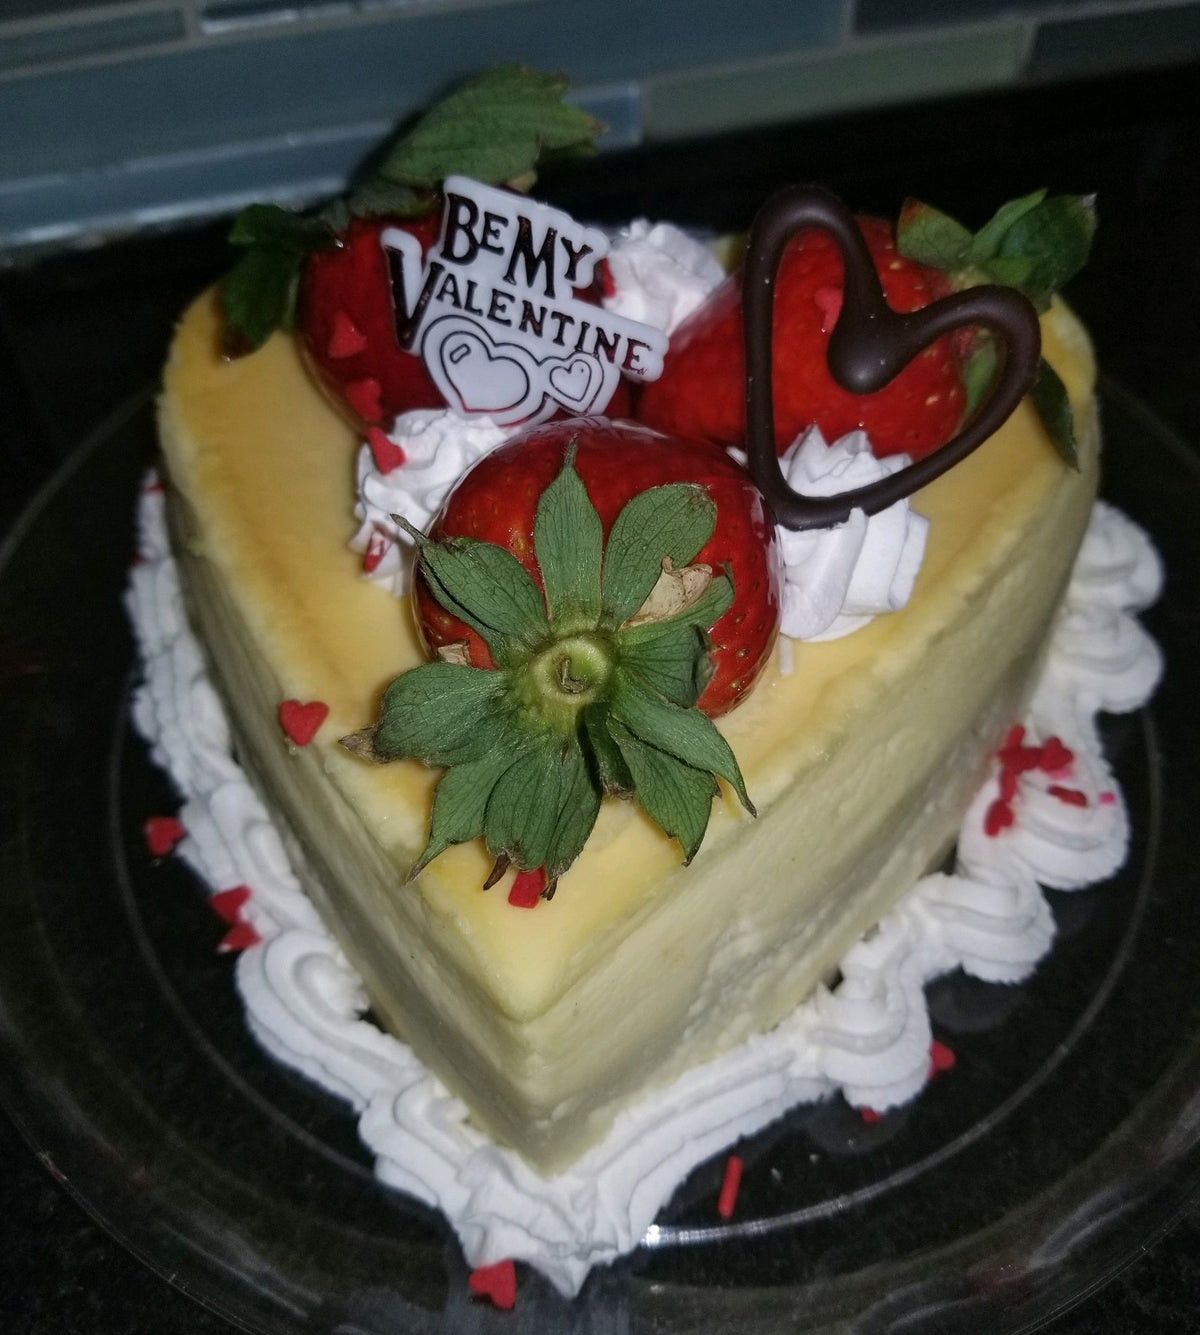 Heart Shape 5" Cheesecake Valentine's Day - For Local Delivery or Curbside Pickup ONLY